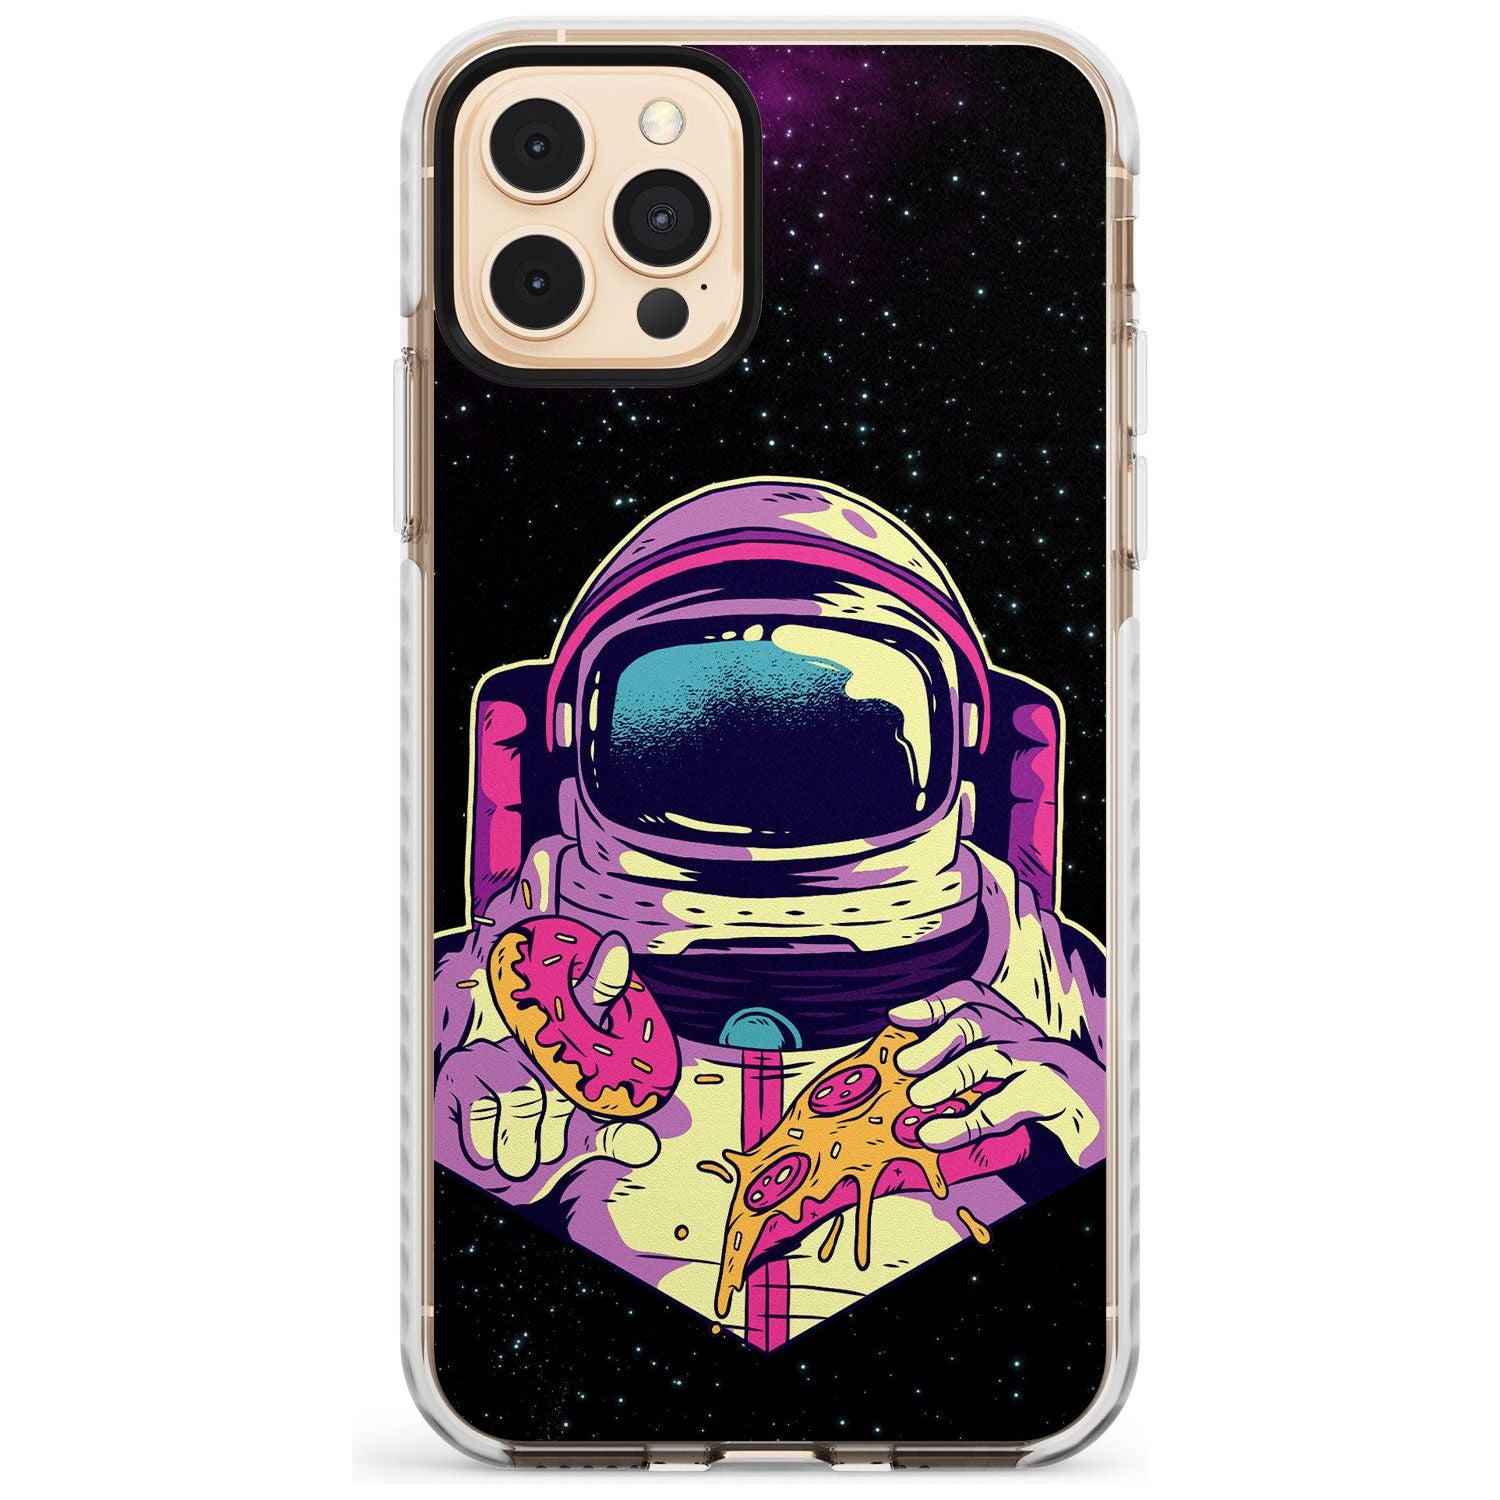 Astro Cheat Meal Impact Phone Case for iPhone 11 Pro Max